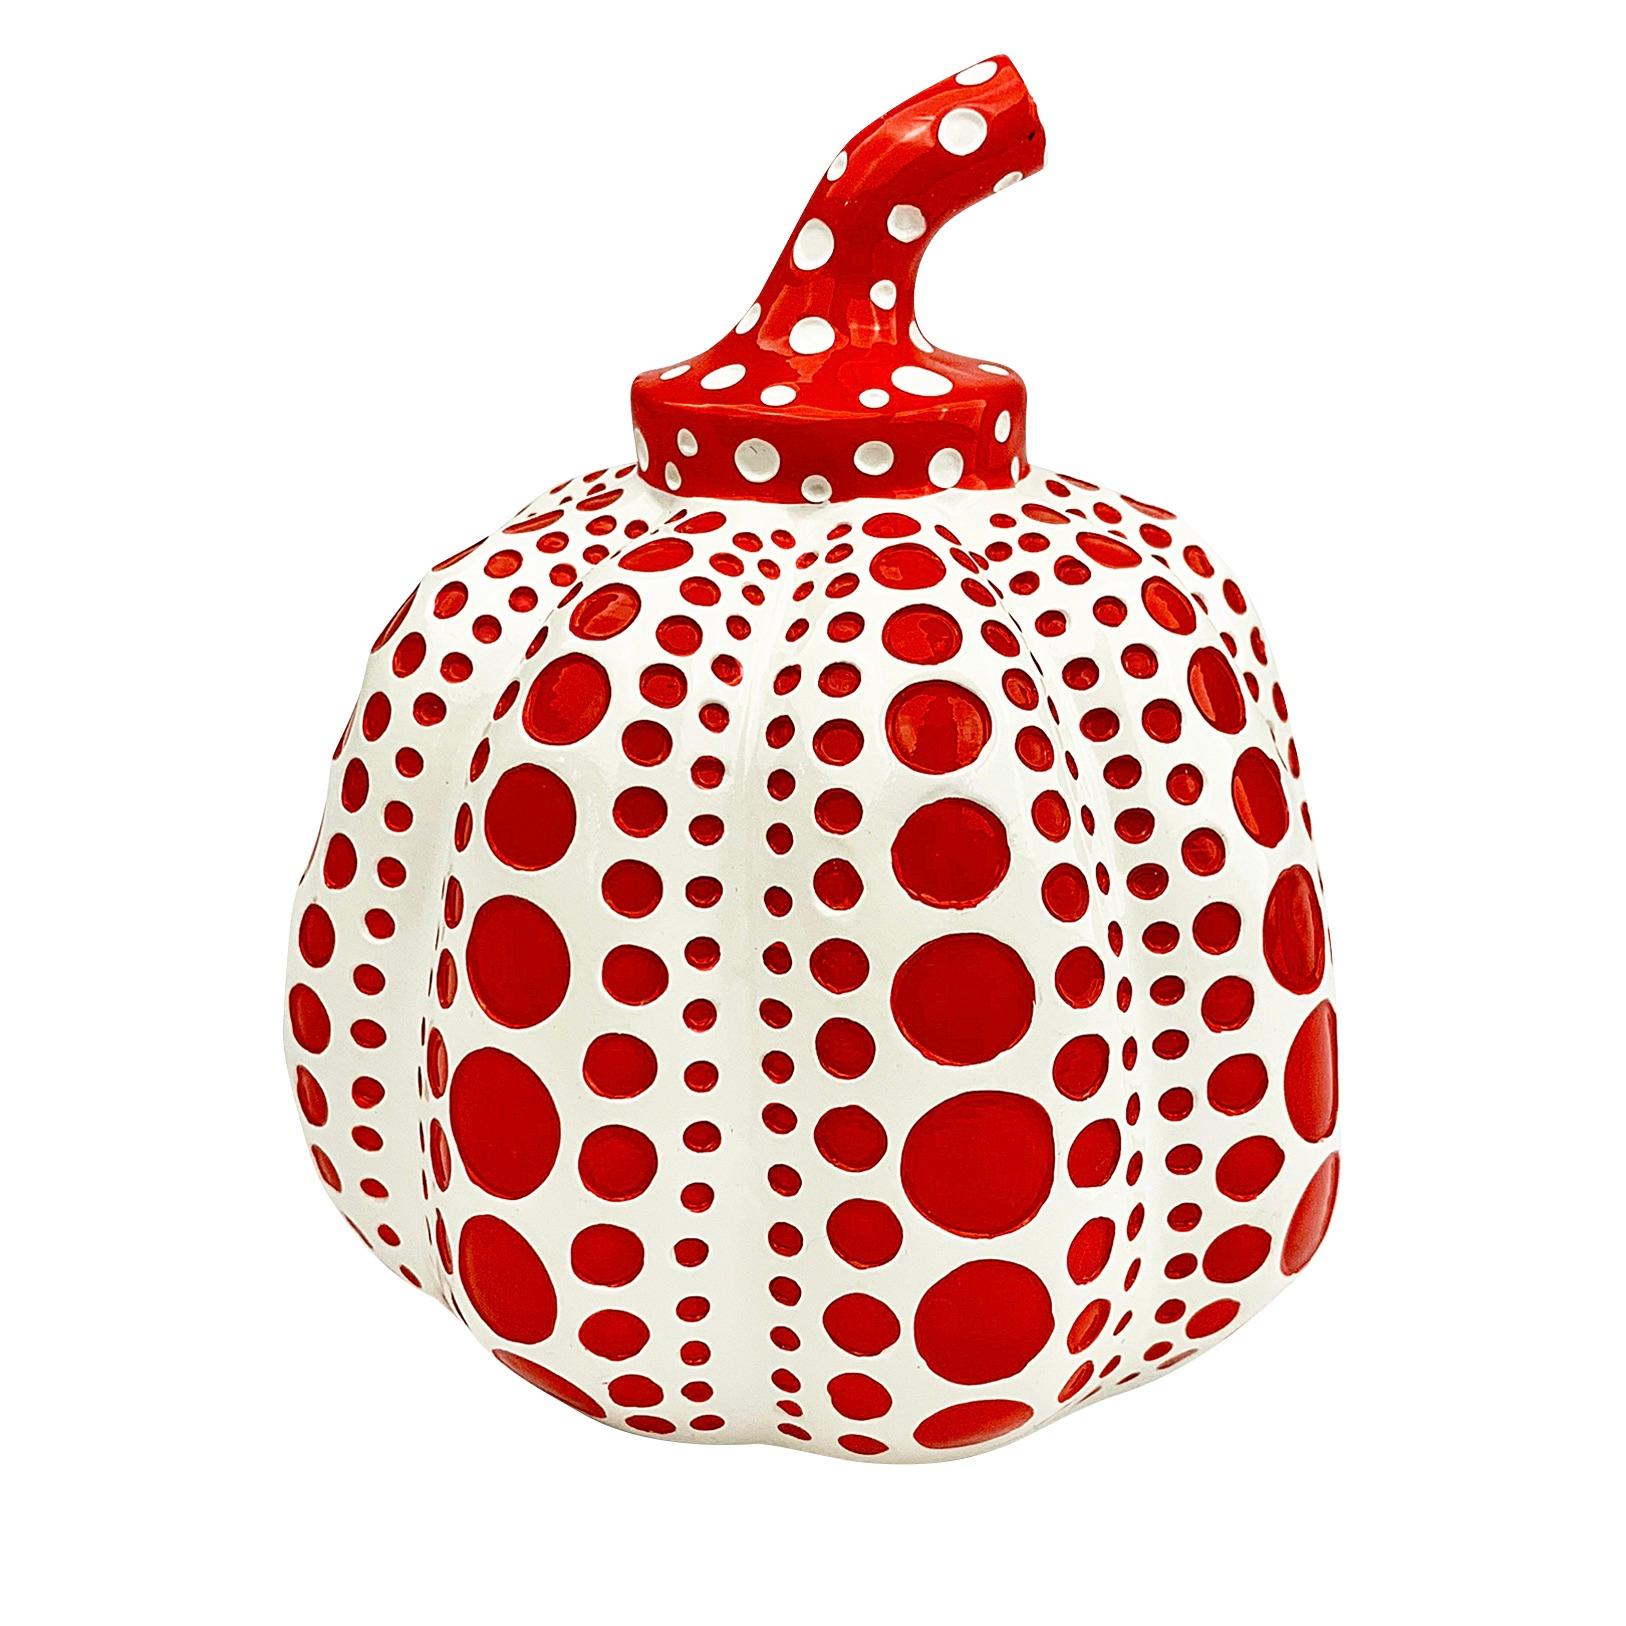 Pumpkins (Yellow & Black & Red & White) Two Painted Sculptures Yayoi Kusama For Sale 1